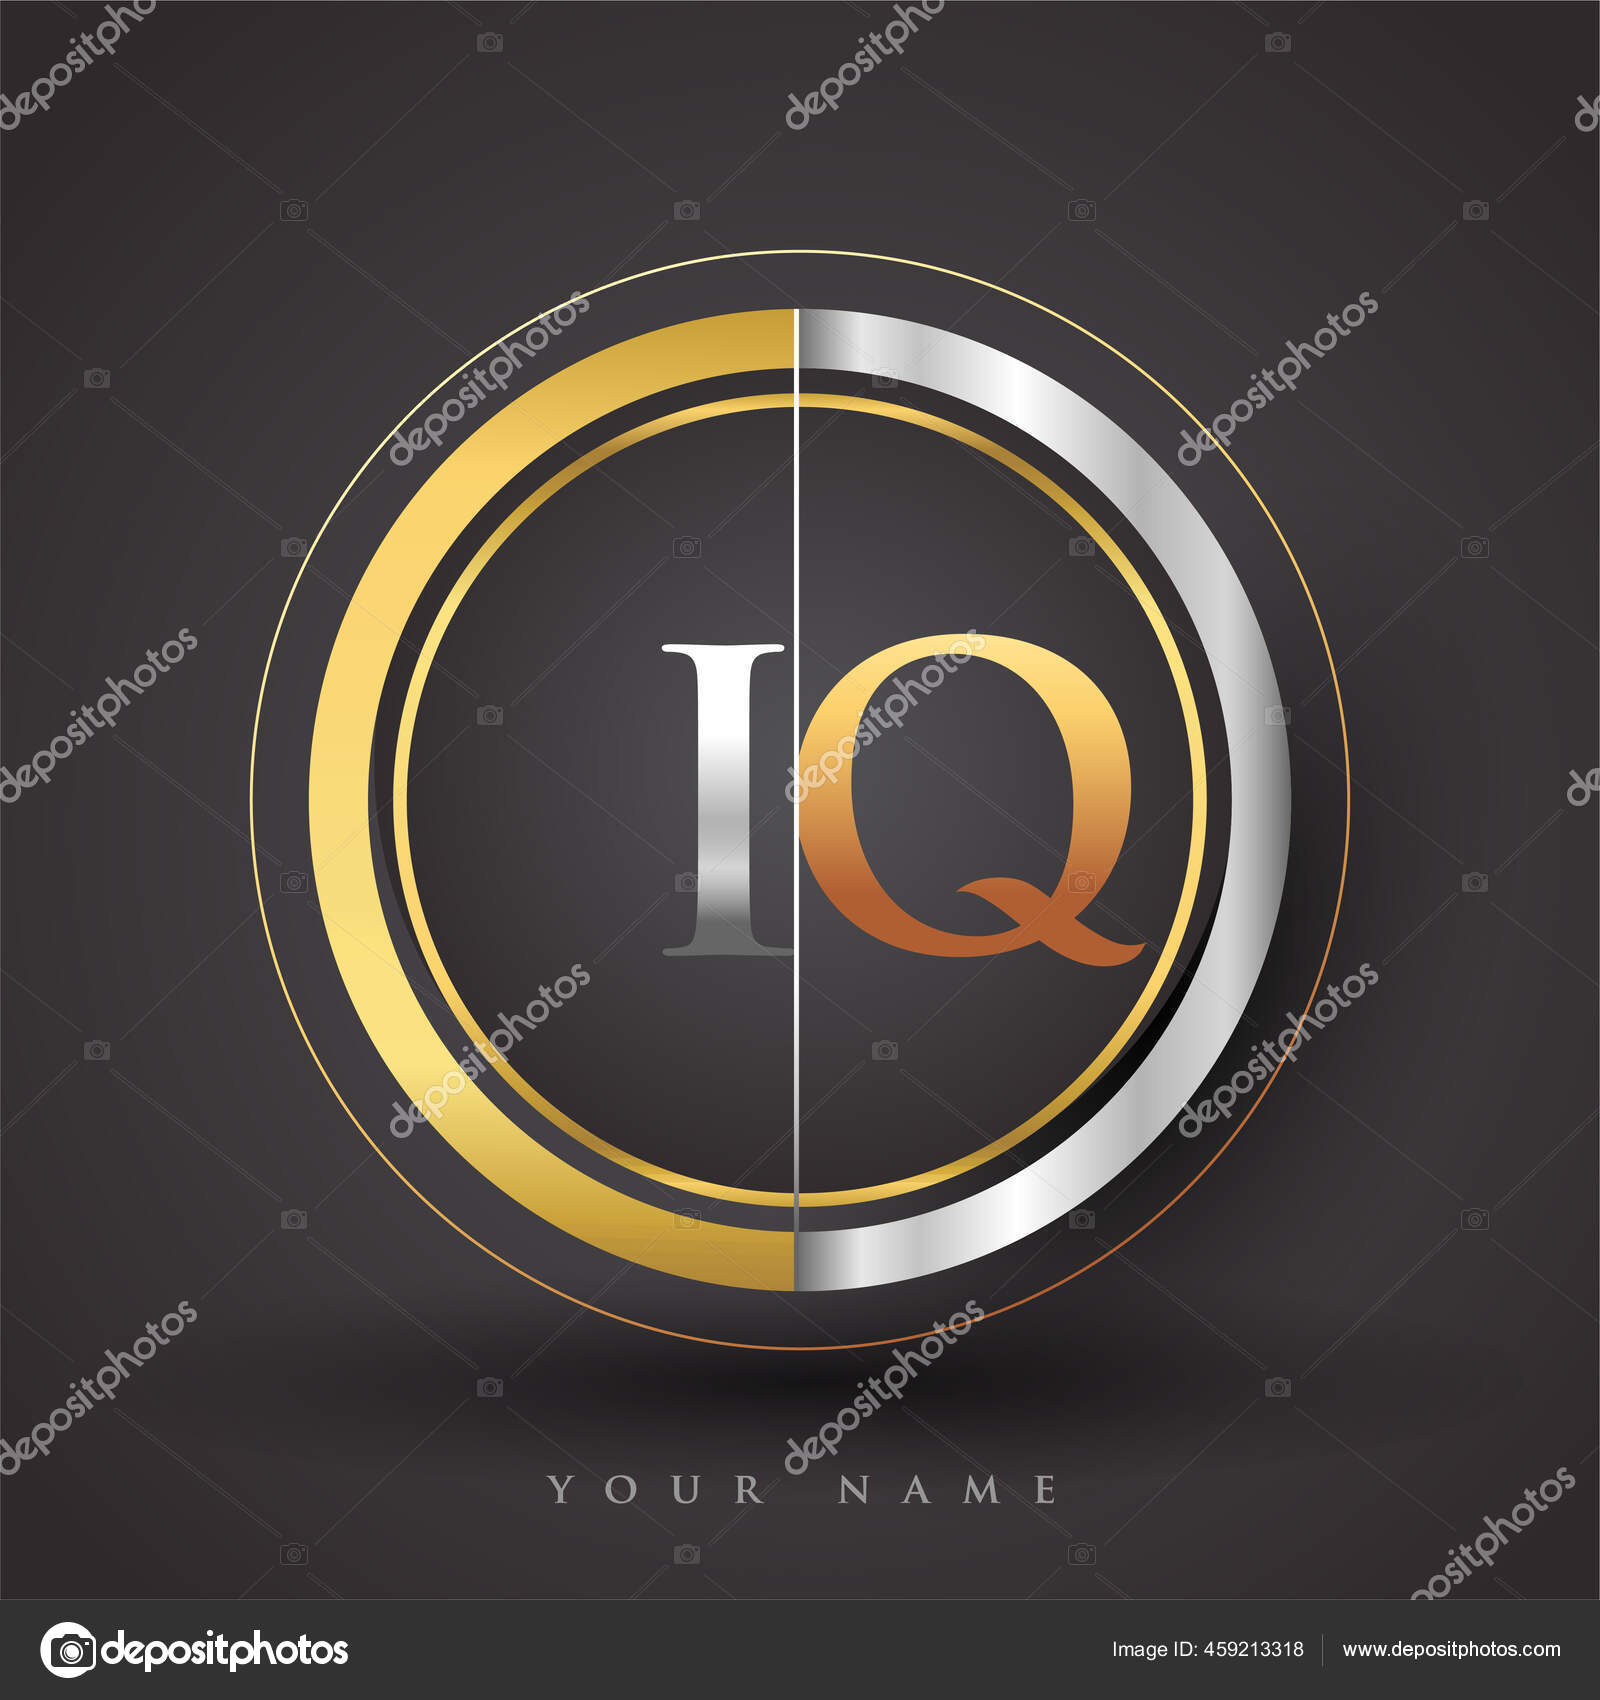 Letter Logo Circle Gold Silver Colored Vector Design Template Elements Vector Image By C Wikagrahic Vector Stock